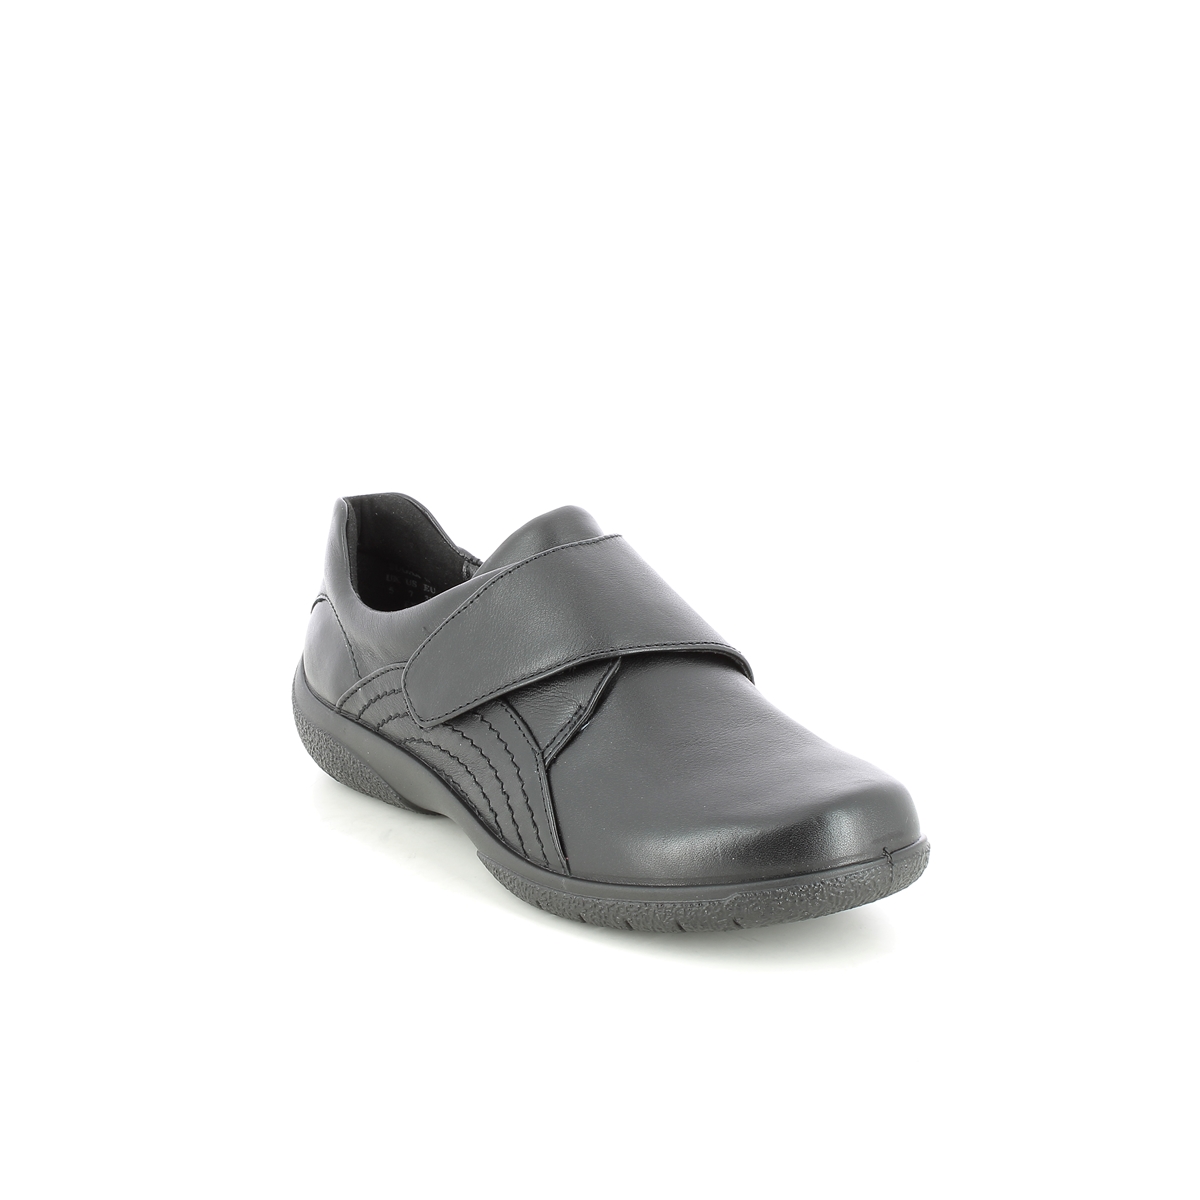 Hotter Sugar 2 Wide Black leather Womens Comfort Slip On Shoes 12011-30 in a Plain Leather in Size 7